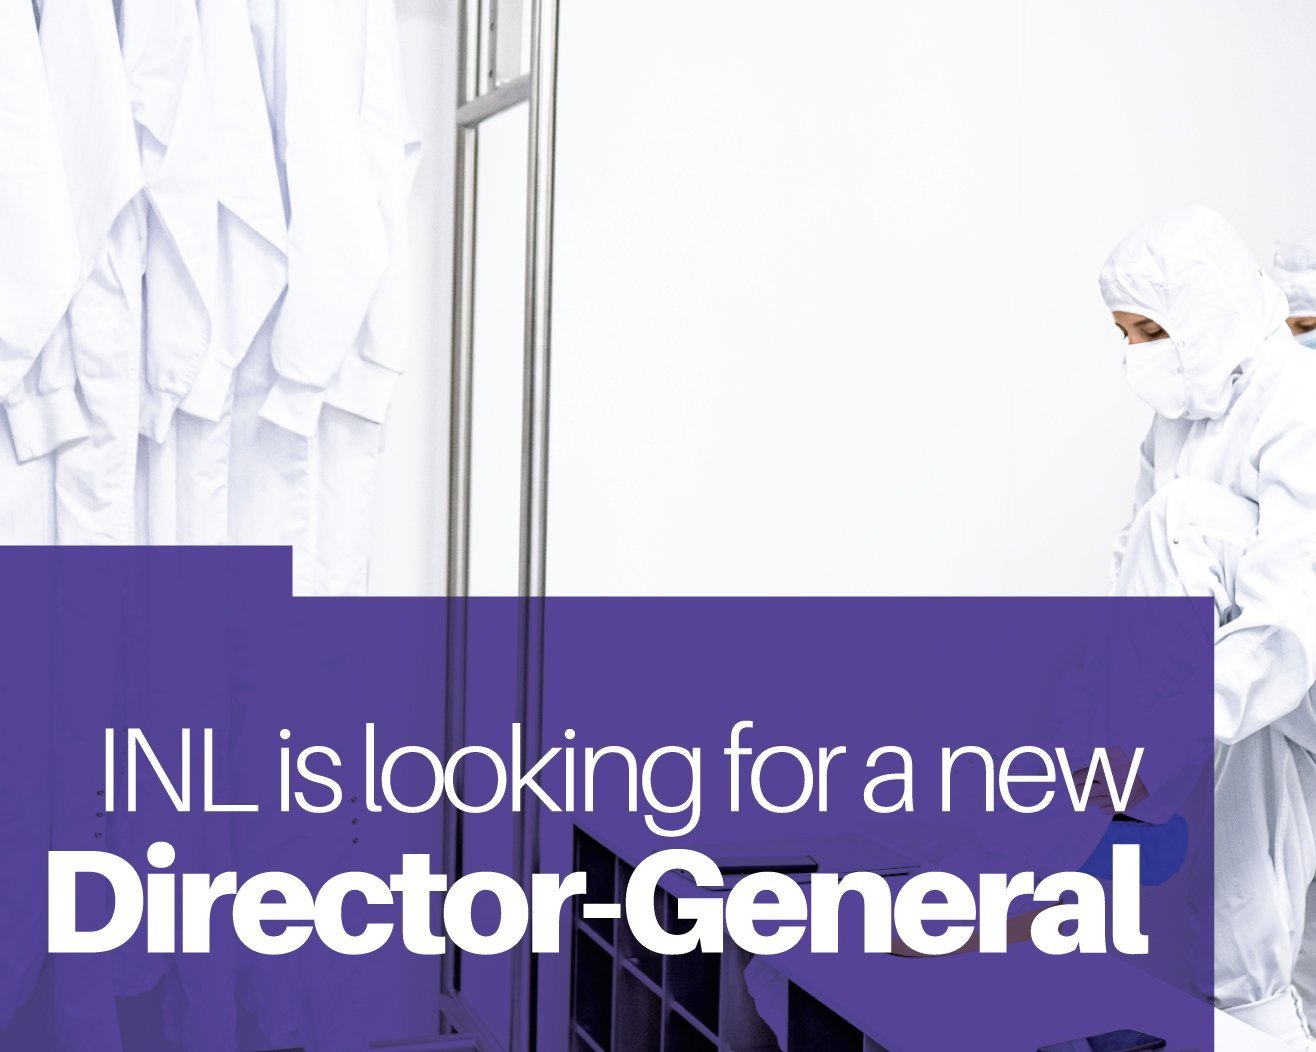 INL is looking for a new Director-General